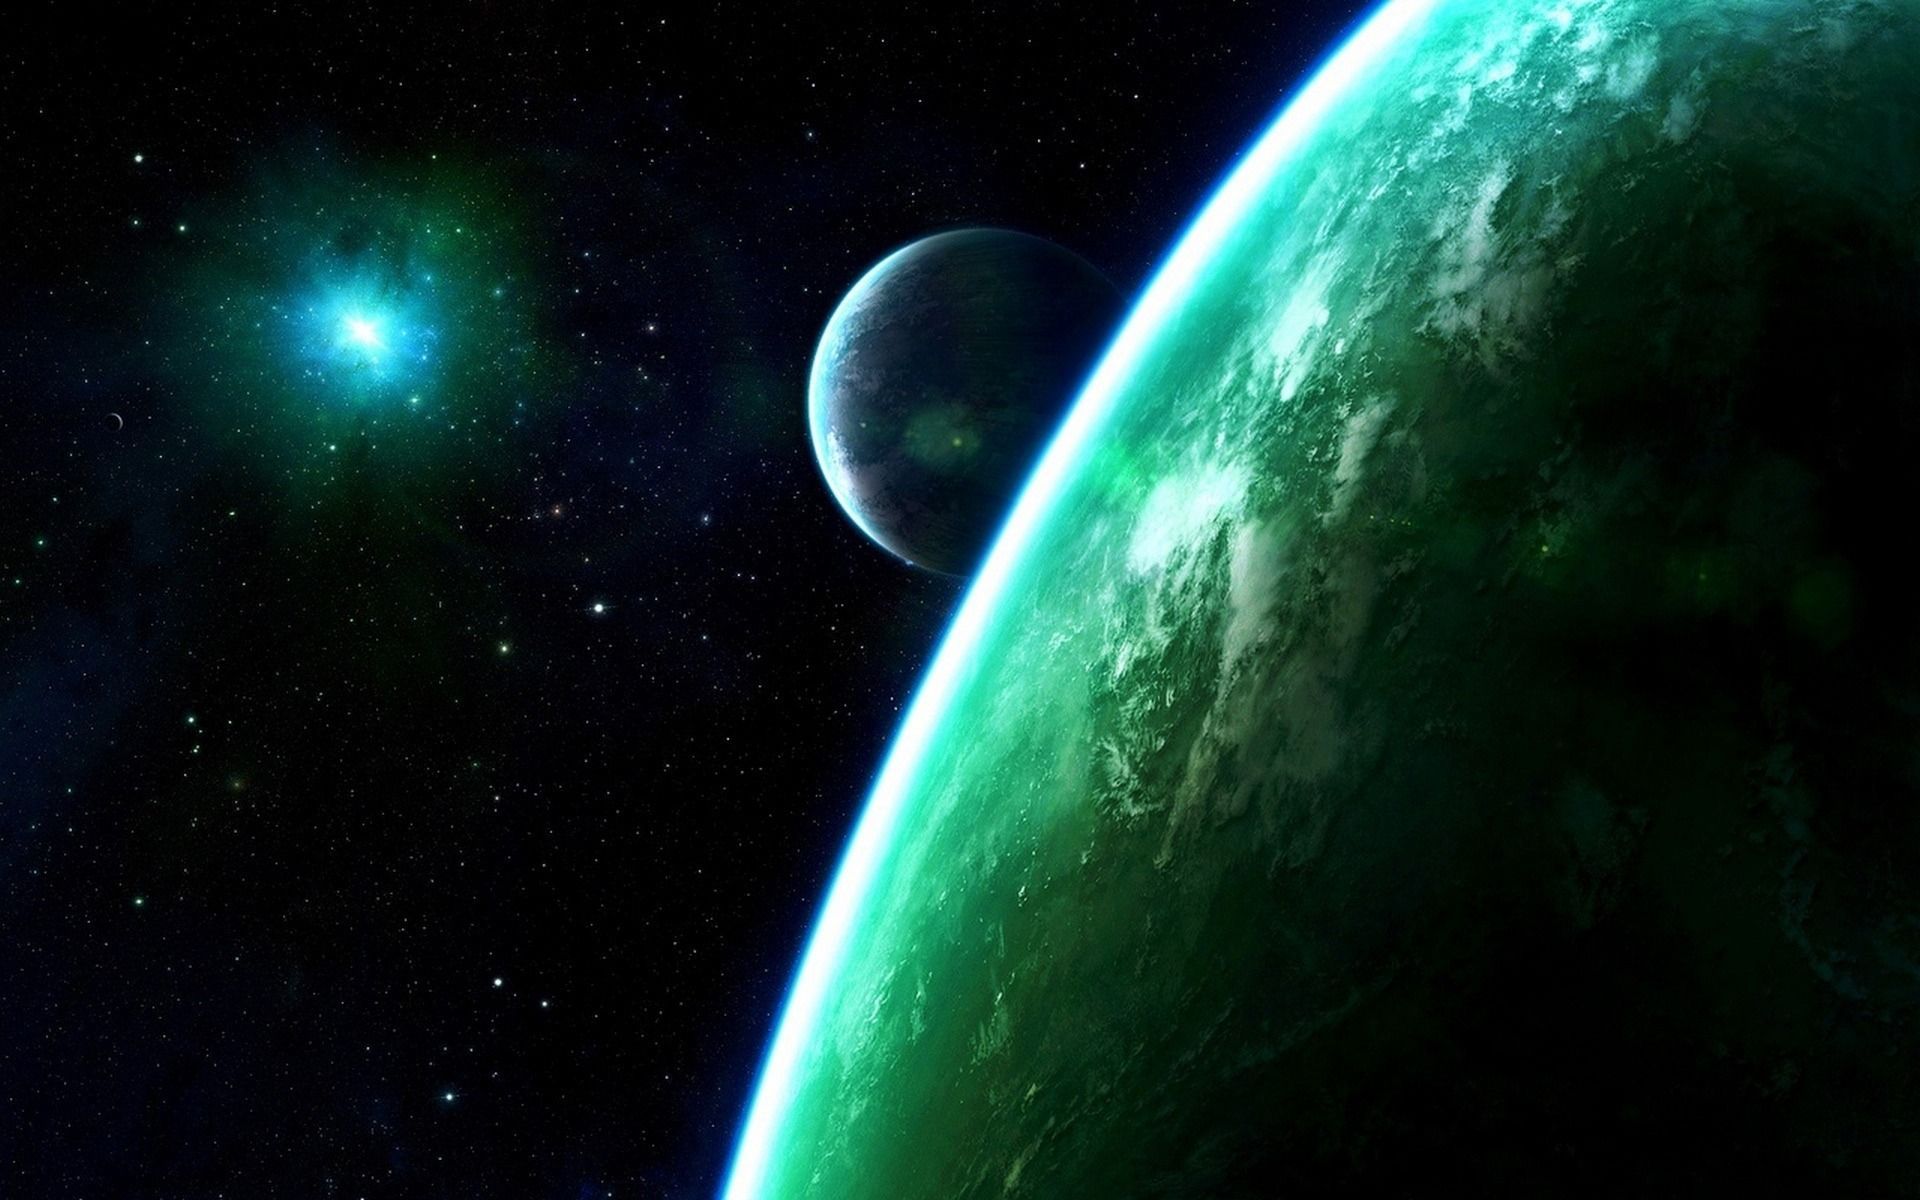 Two planets in space, one green and one gray, with a bright blue star in the background. - 1920x1200